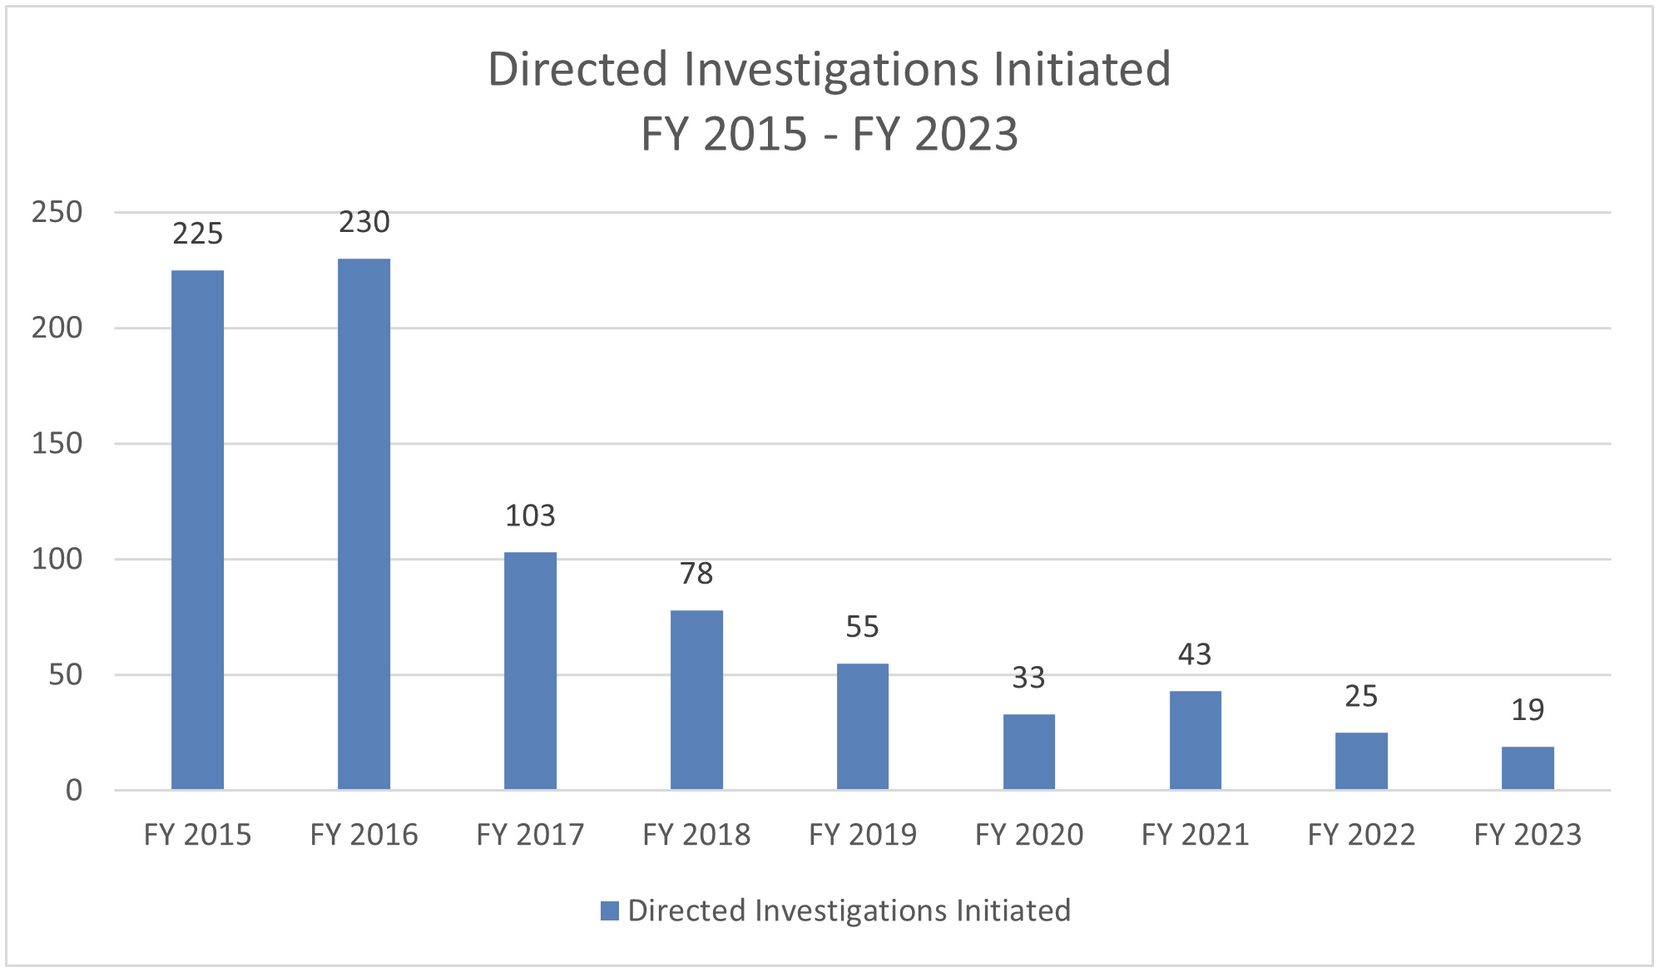 EEOC Directed Investigations Initiated FY 2015-2023